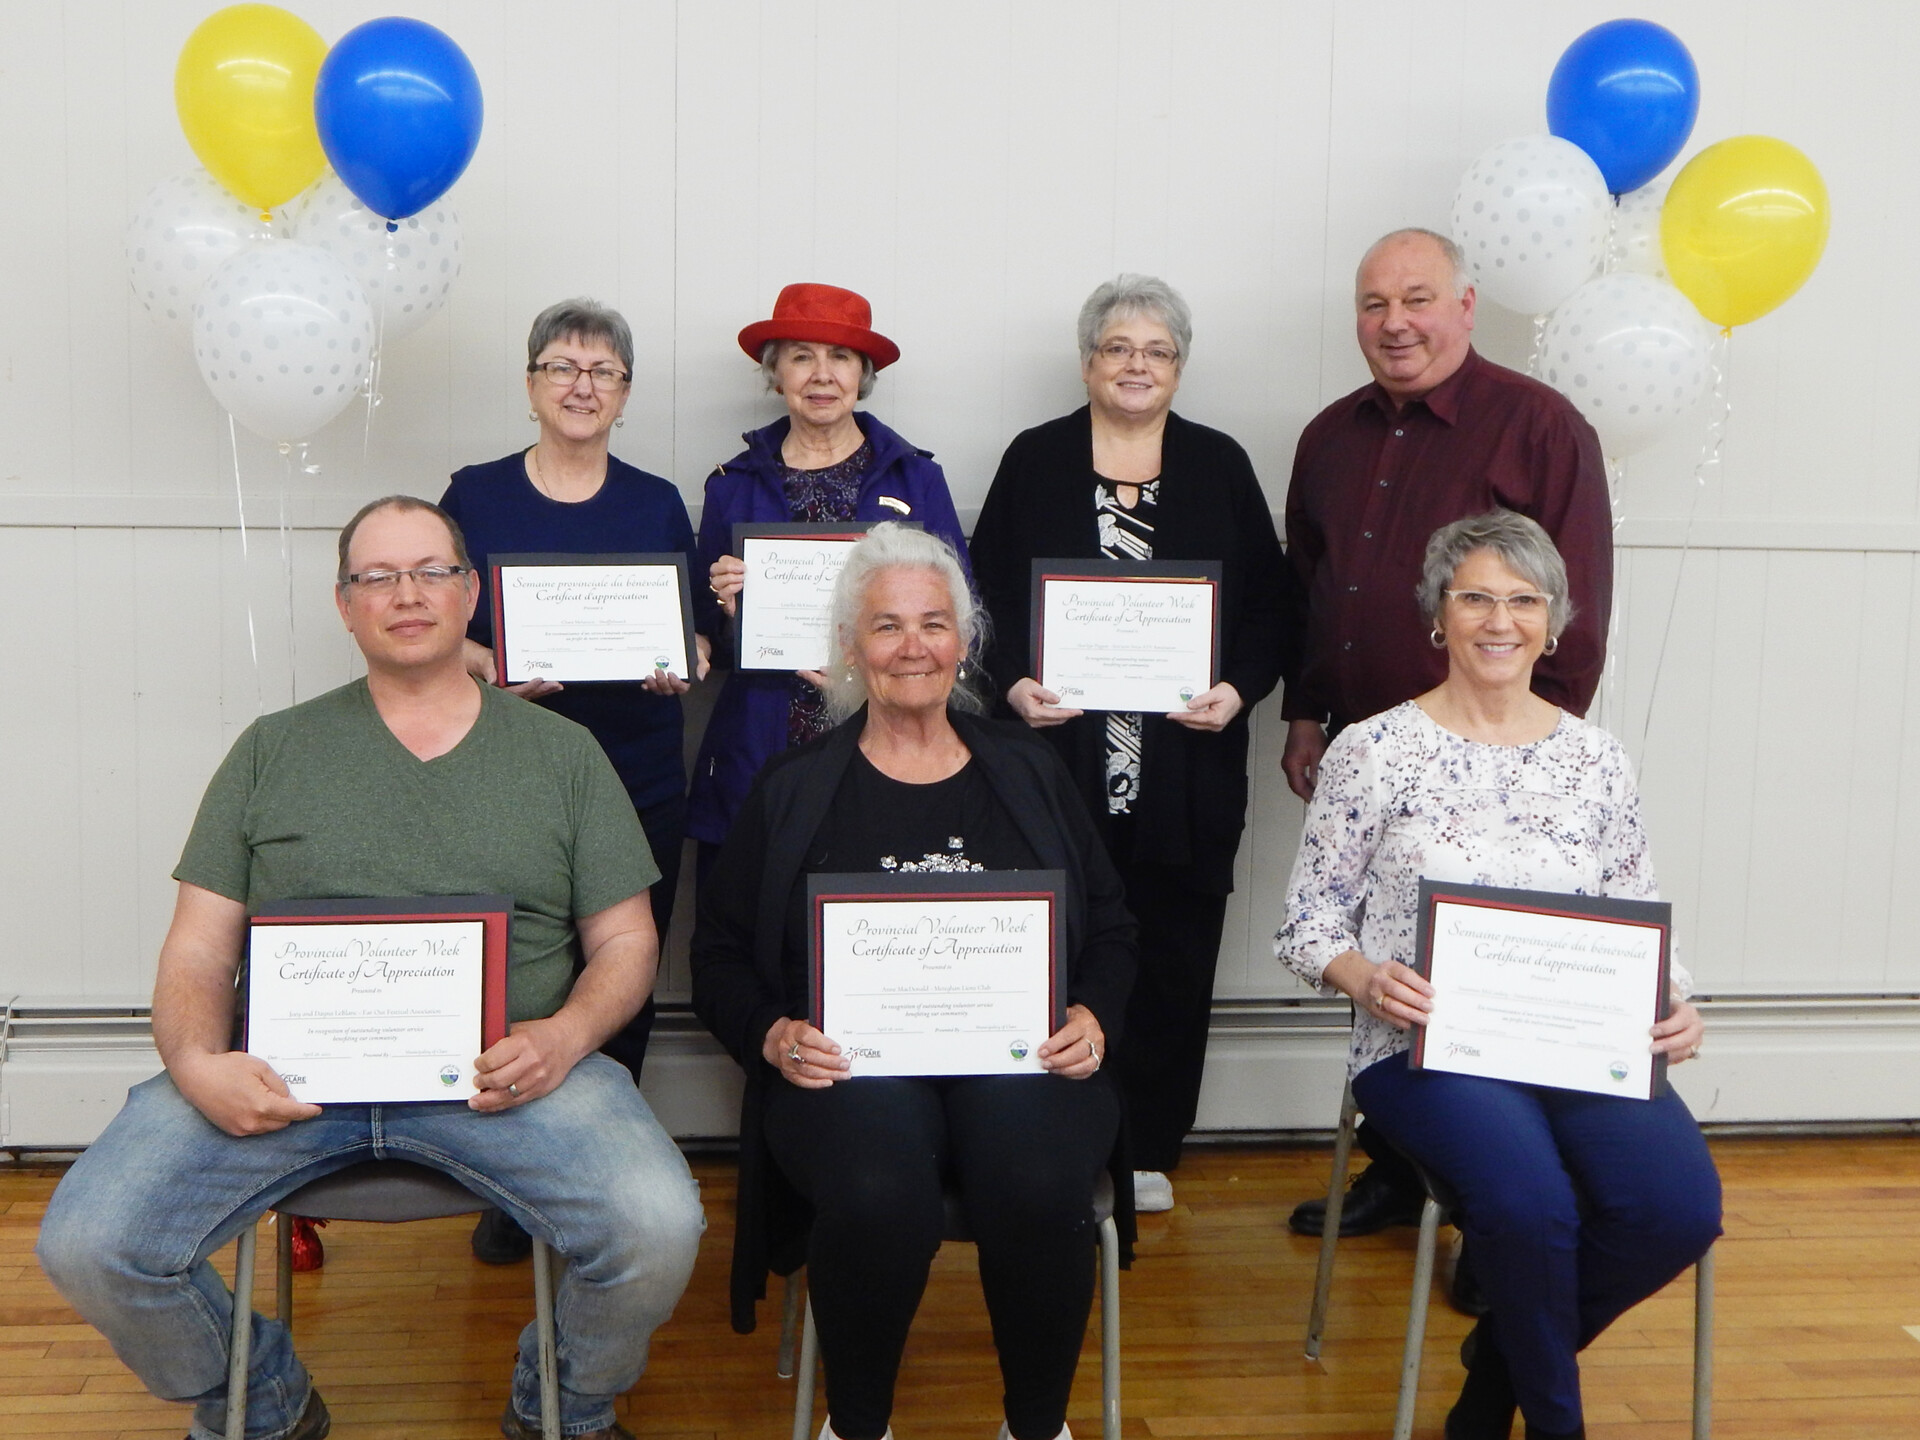                         Clare Volunteer Award recipients for 2022 Back row, left to right: Clara Melanson, Louella McKinnon, Marilyn Piggott and Councillor Nil Doucet Front row, left to right: Joey and Dayna (posthumously) LeBlanc, Anne MacDonald and Suzanne McCauley Absent: Michael LeBlanc and Robin Murphy                                                                                               